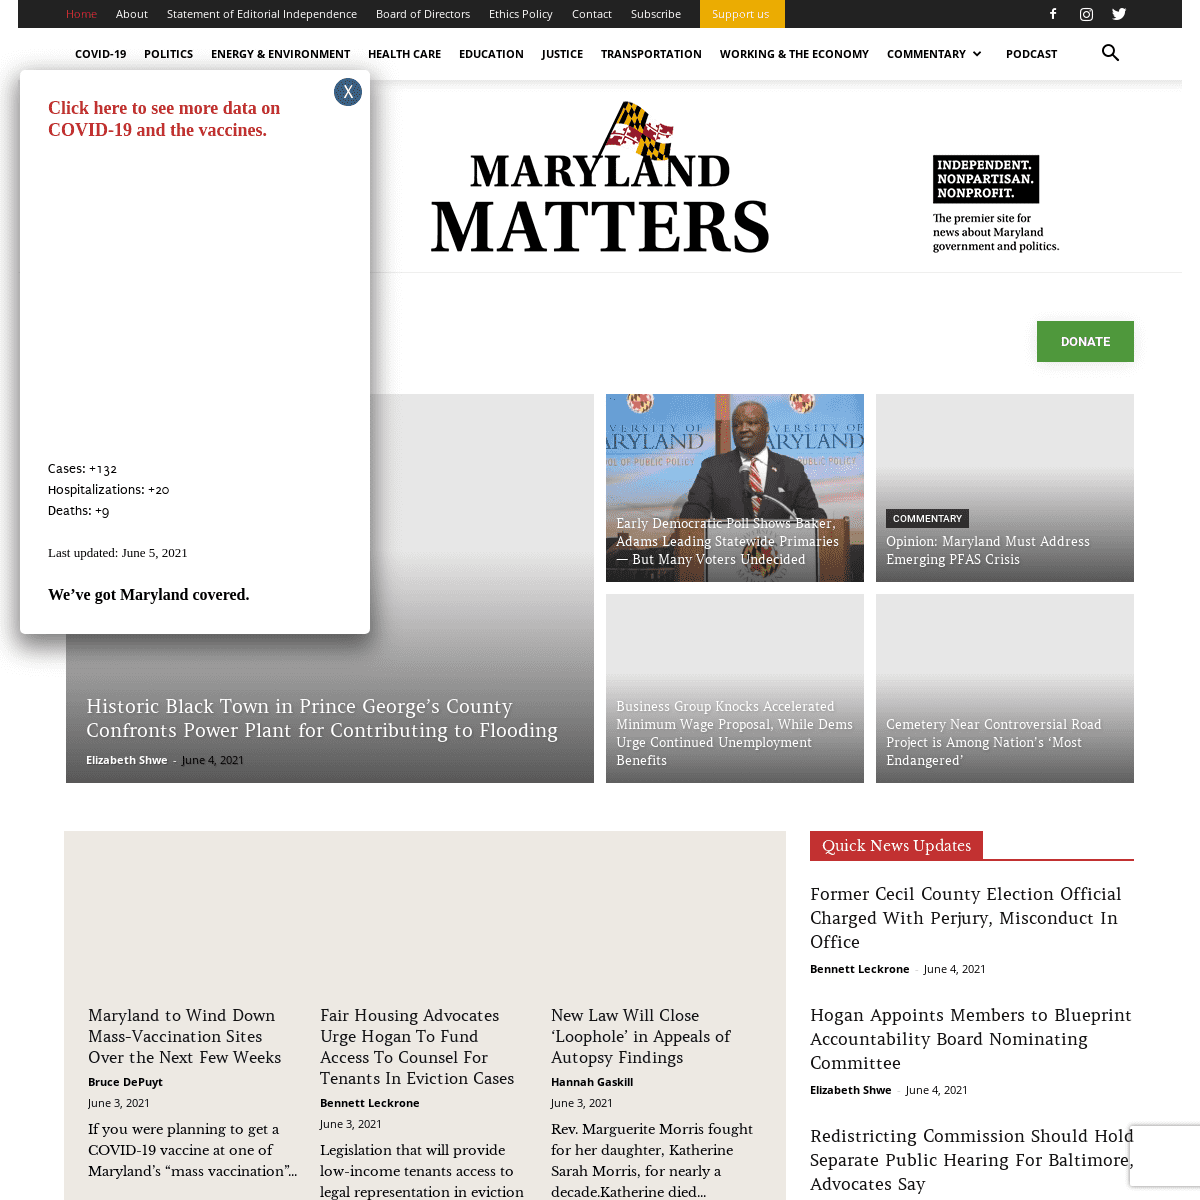 A complete backup of https://marylandmatters.org